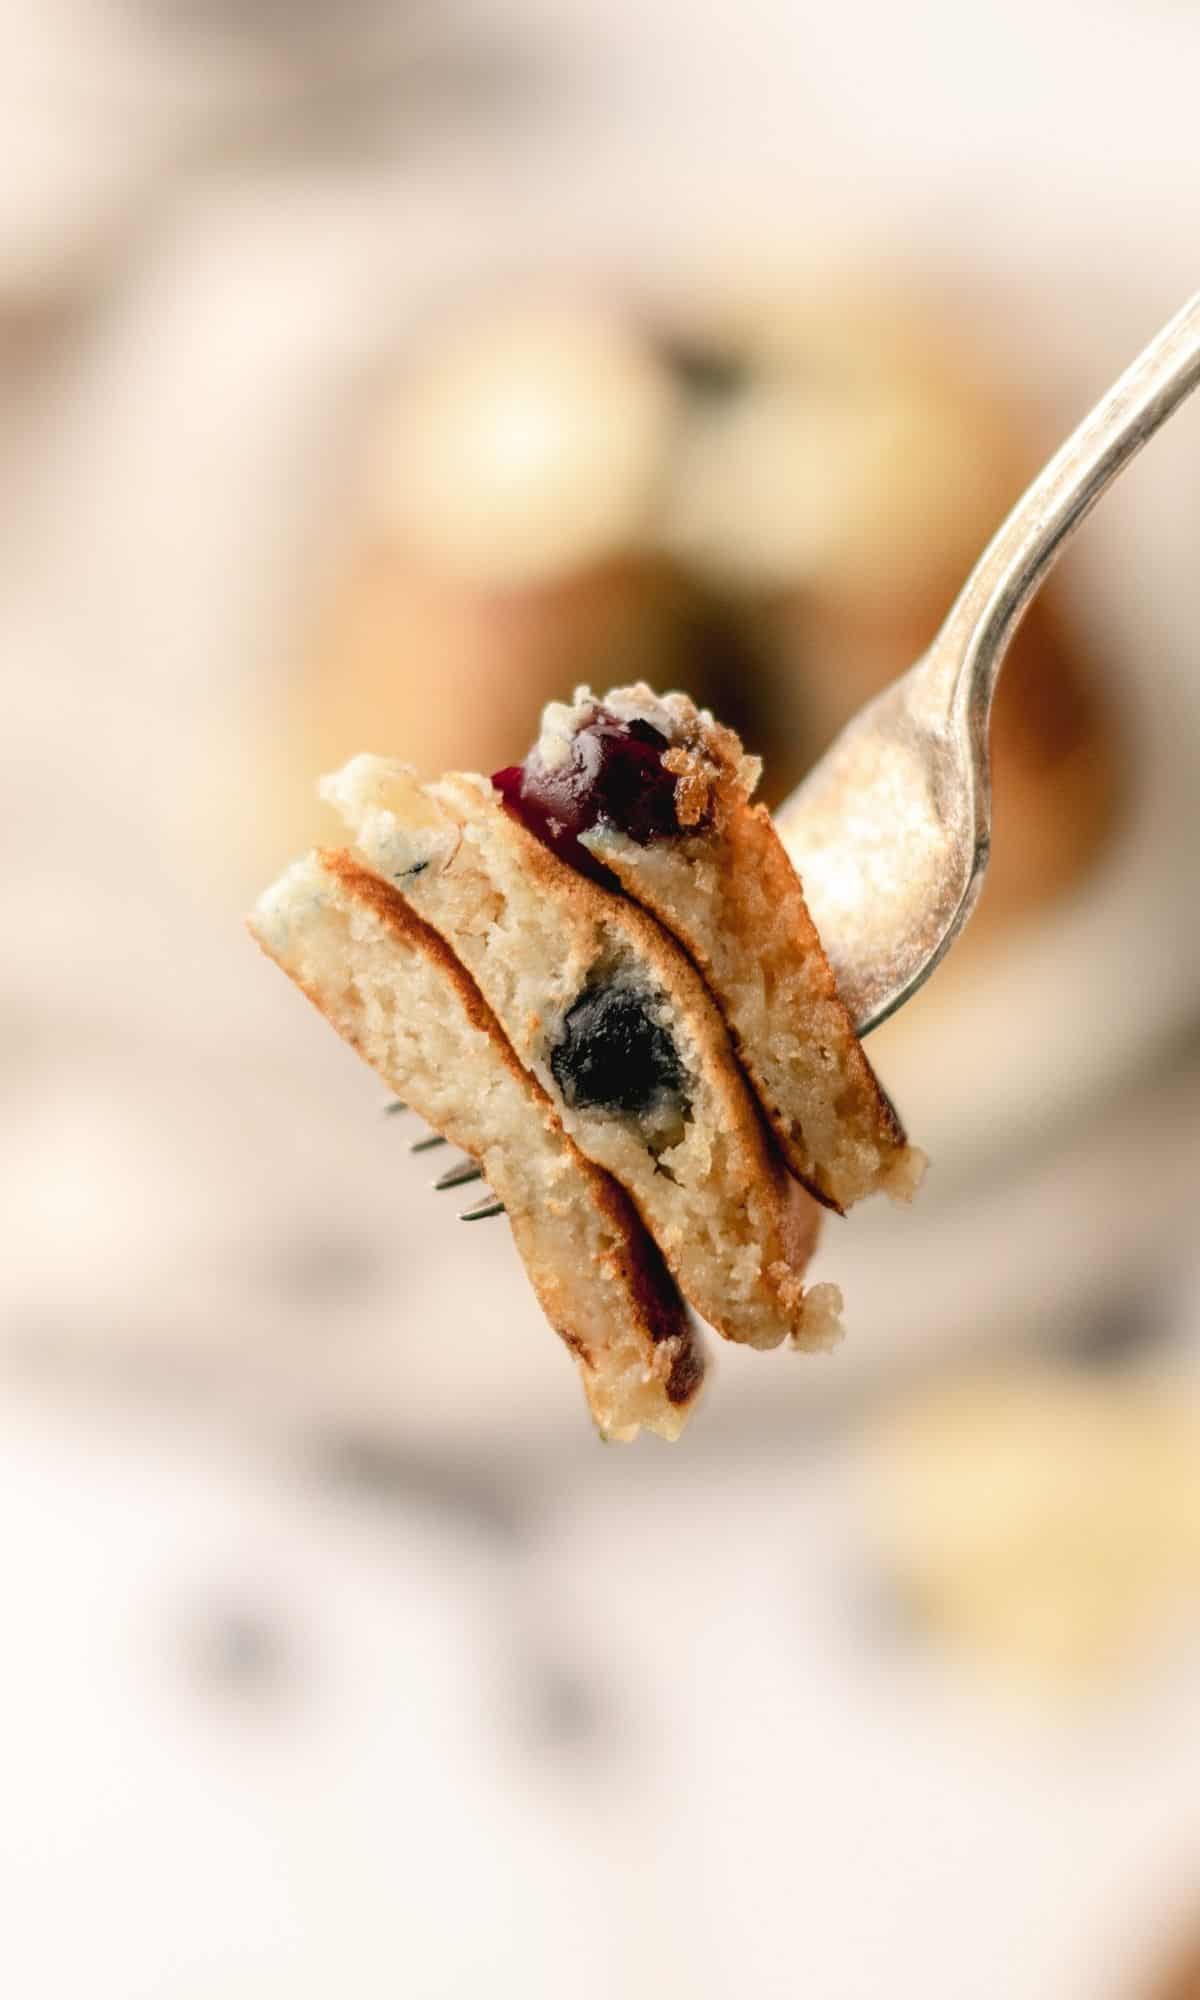 A bite of Banana Blueberry Buttermilk Pancakes on a fork.